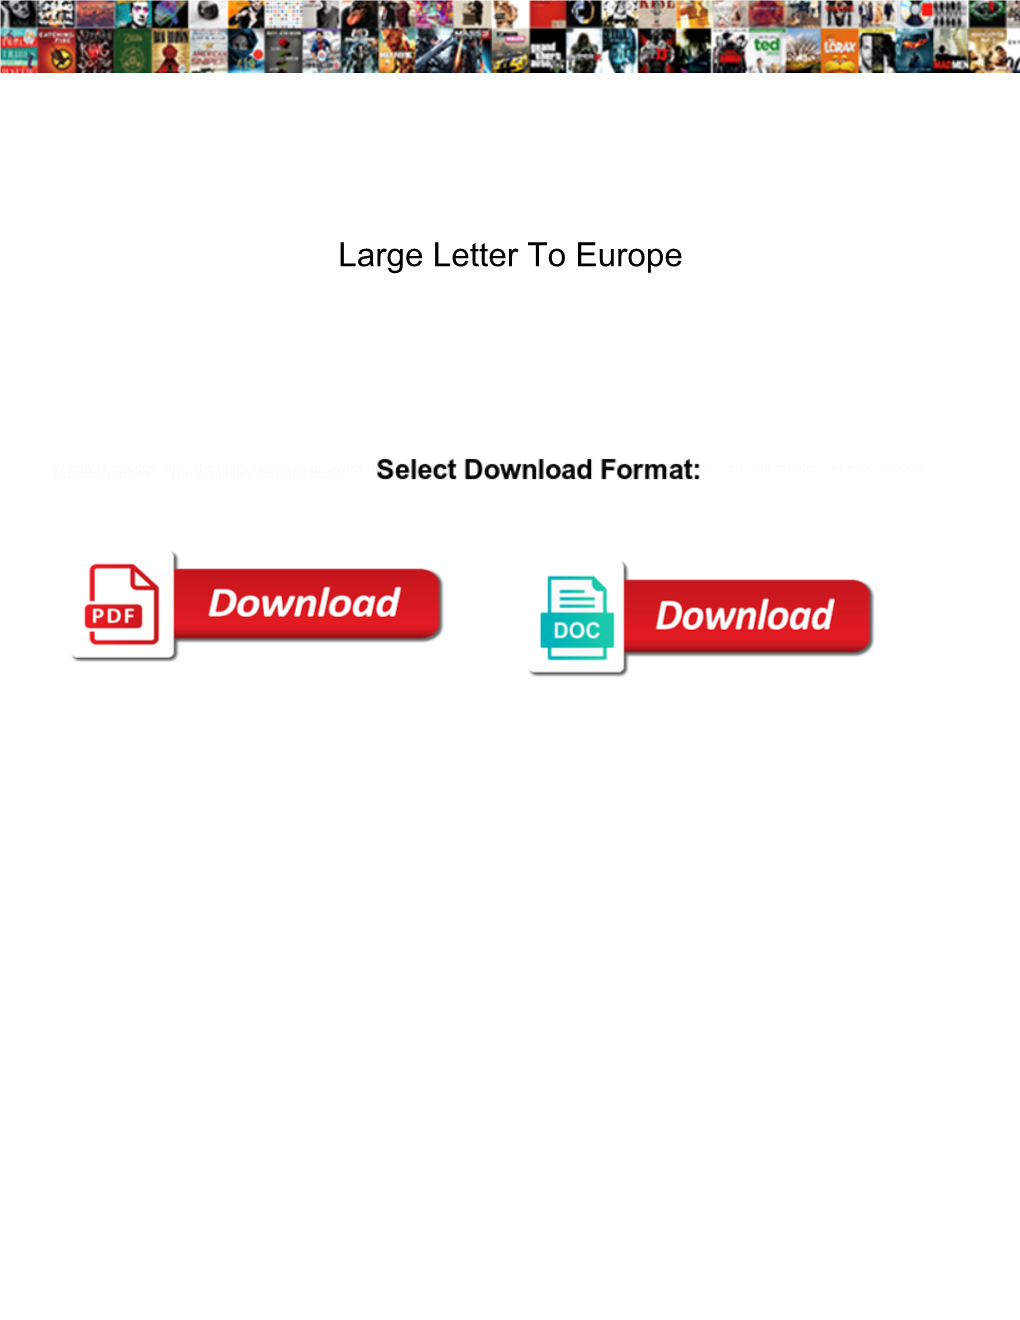 Large Letter to Europe